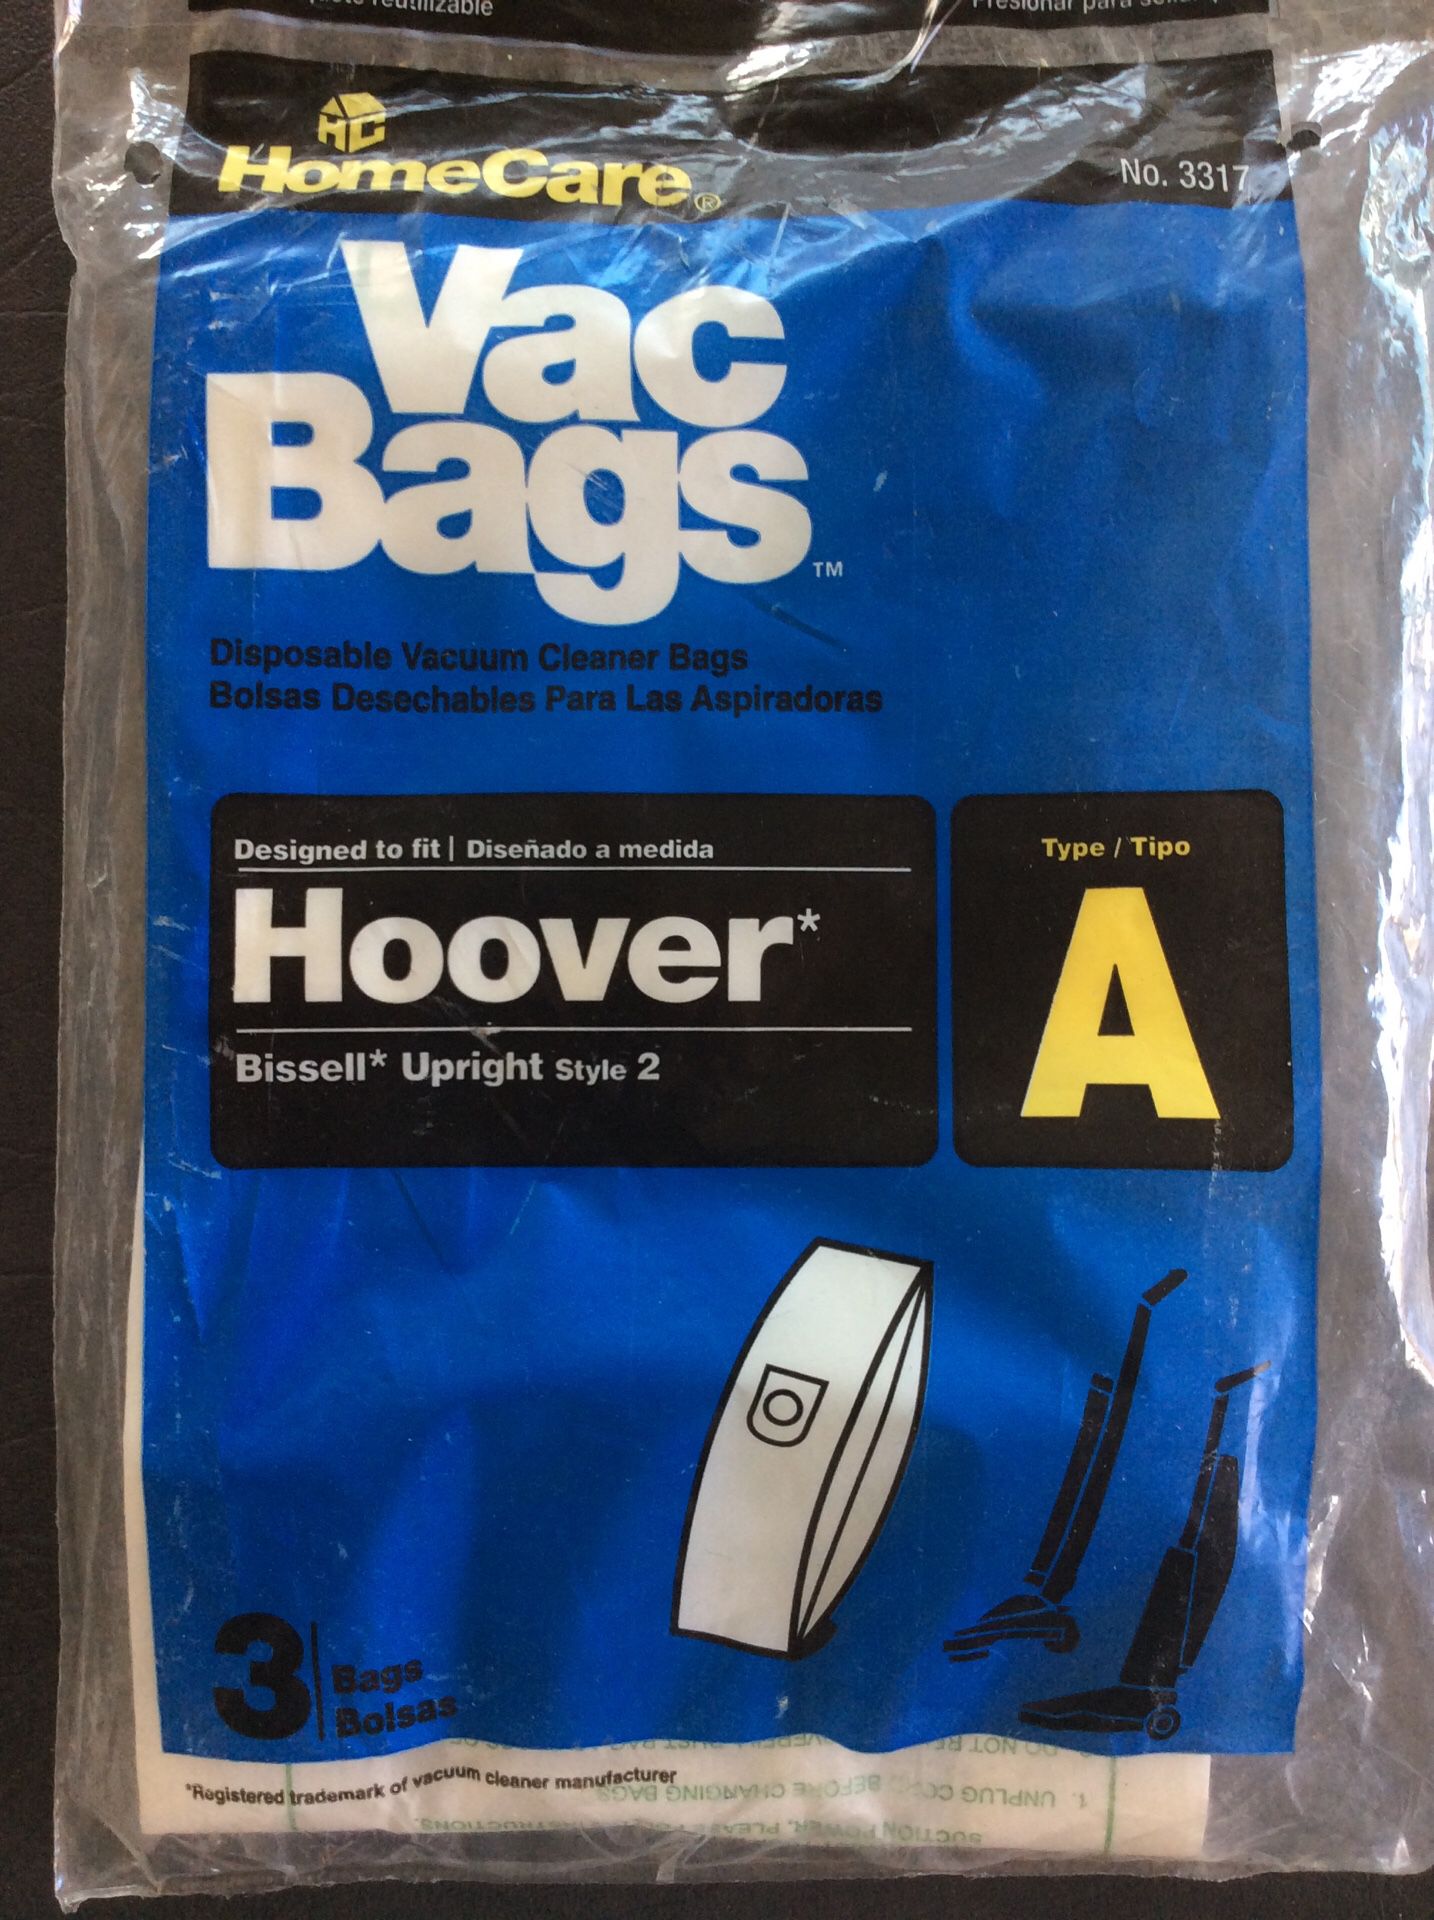 2-dispossable vacuum cleaner bags for Hoover Bissell Upright Style 2 (Type A)